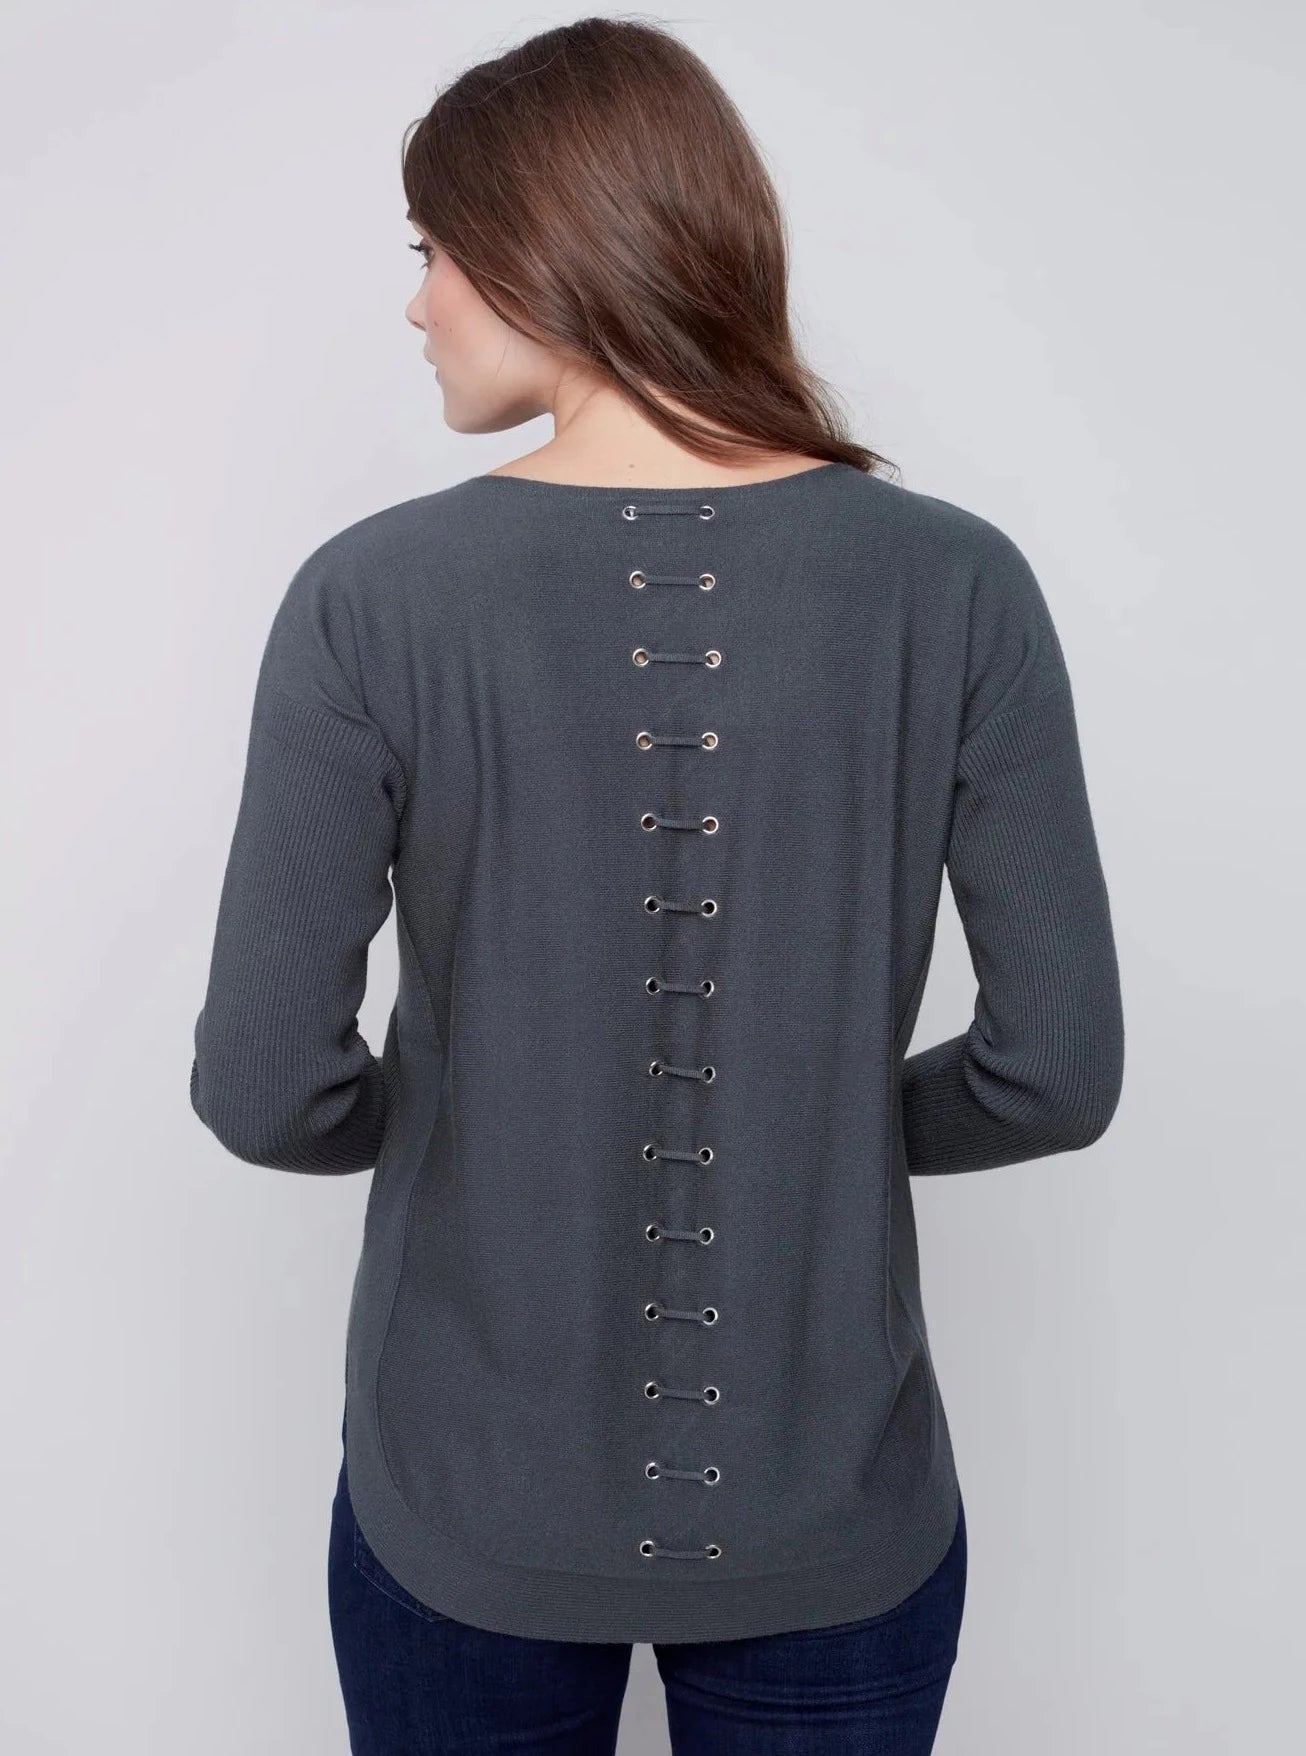 Long Sleeve Sweater With Black Eyelet Detail [Emerald-C2170Y]